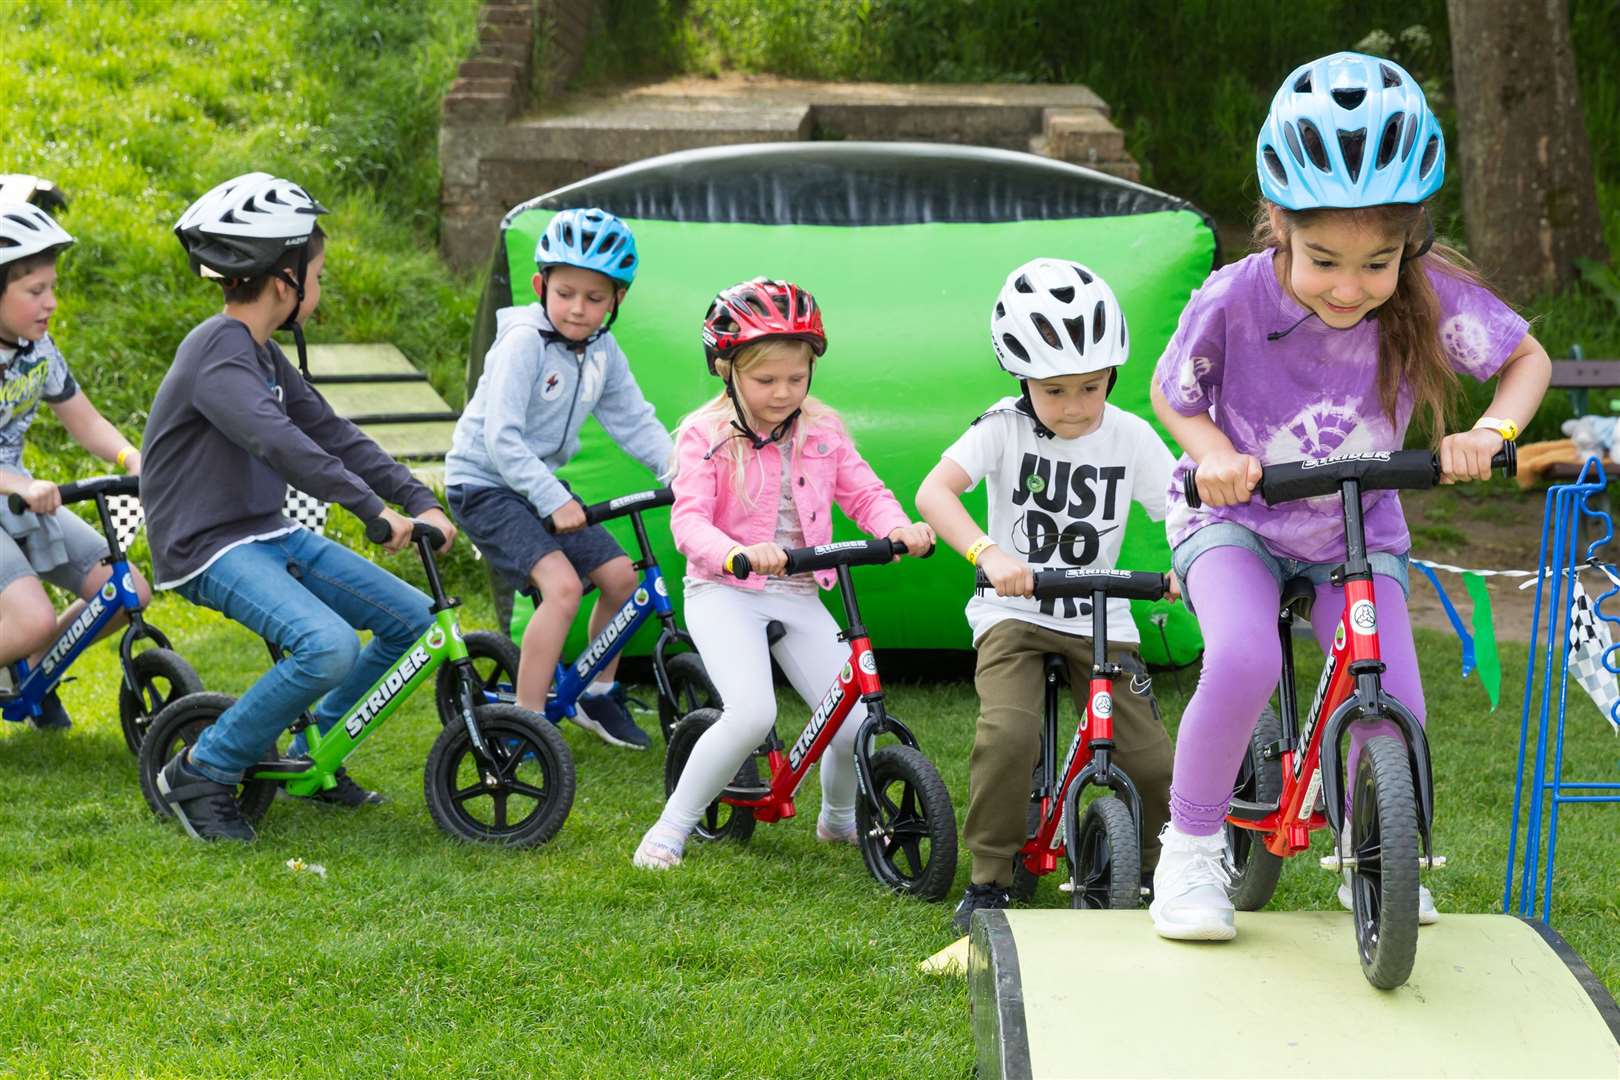 Misa, aged five, from Palace Wood Primary School in Maidstone leads the charge on the balance bikes adventure course at Buster's Big Bash held at Dane John Gardens, Canterbury.